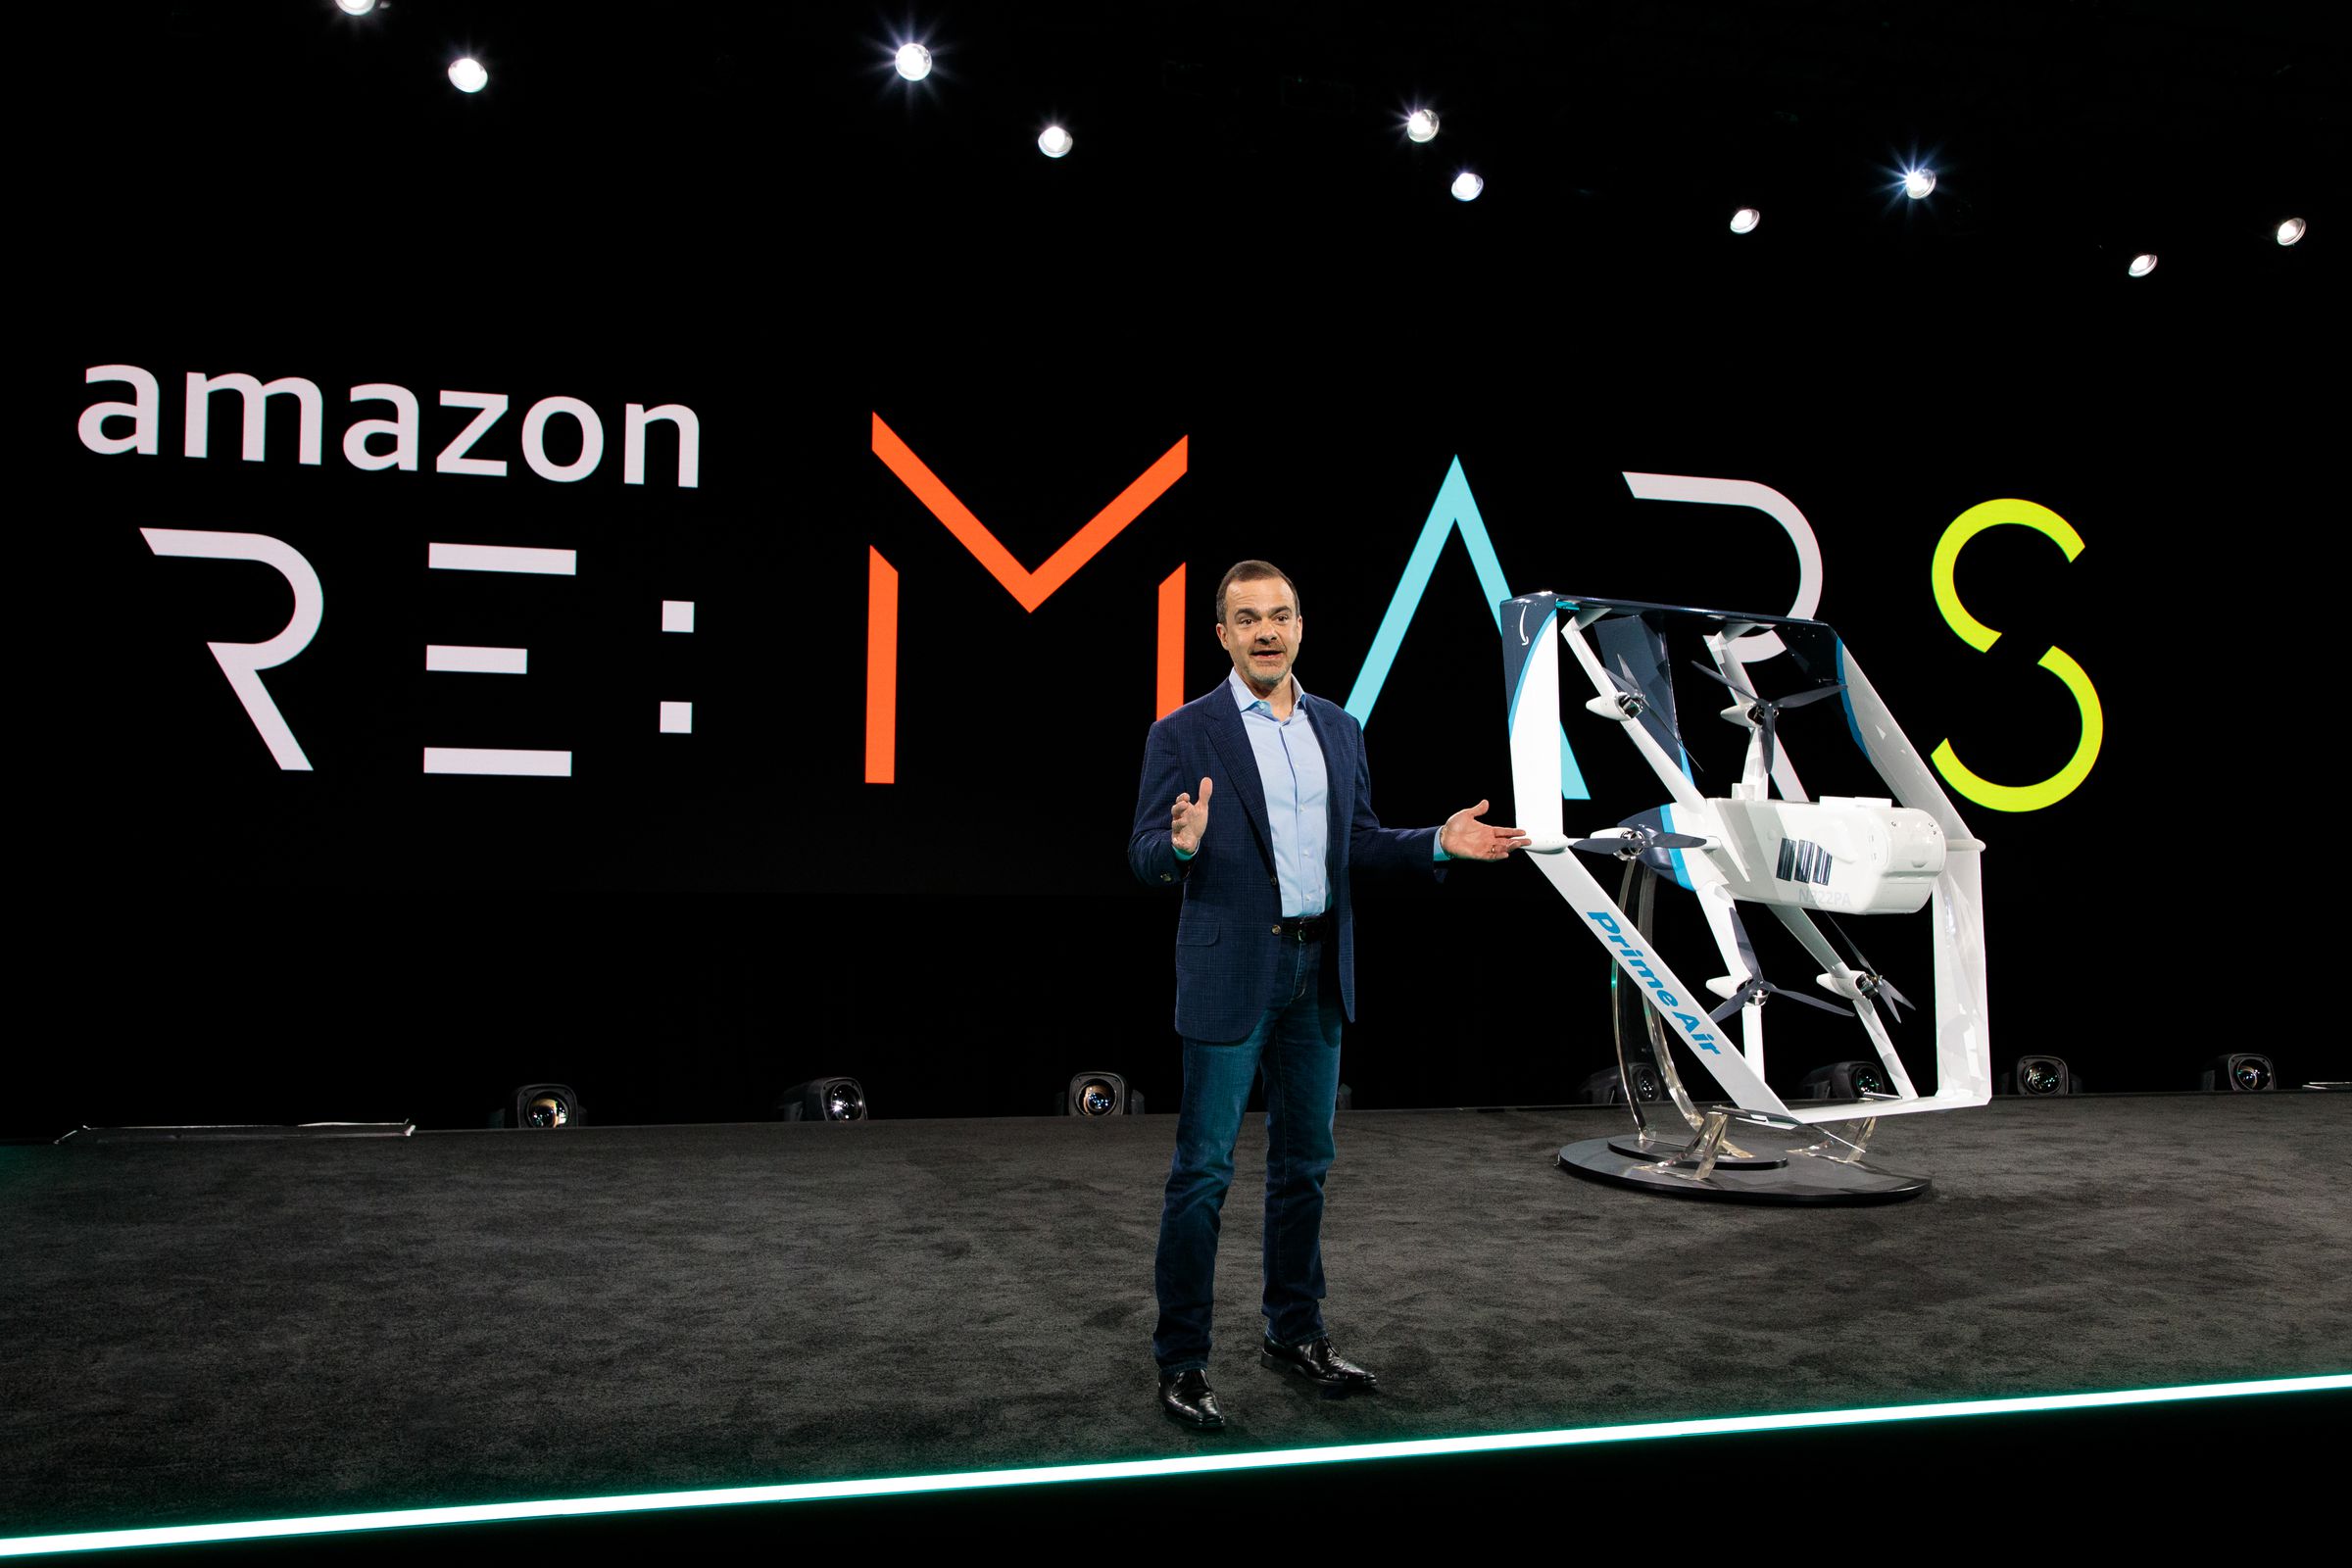 Amazon’s Jeff Wilke shows off the new drone onstage at re:MARS.